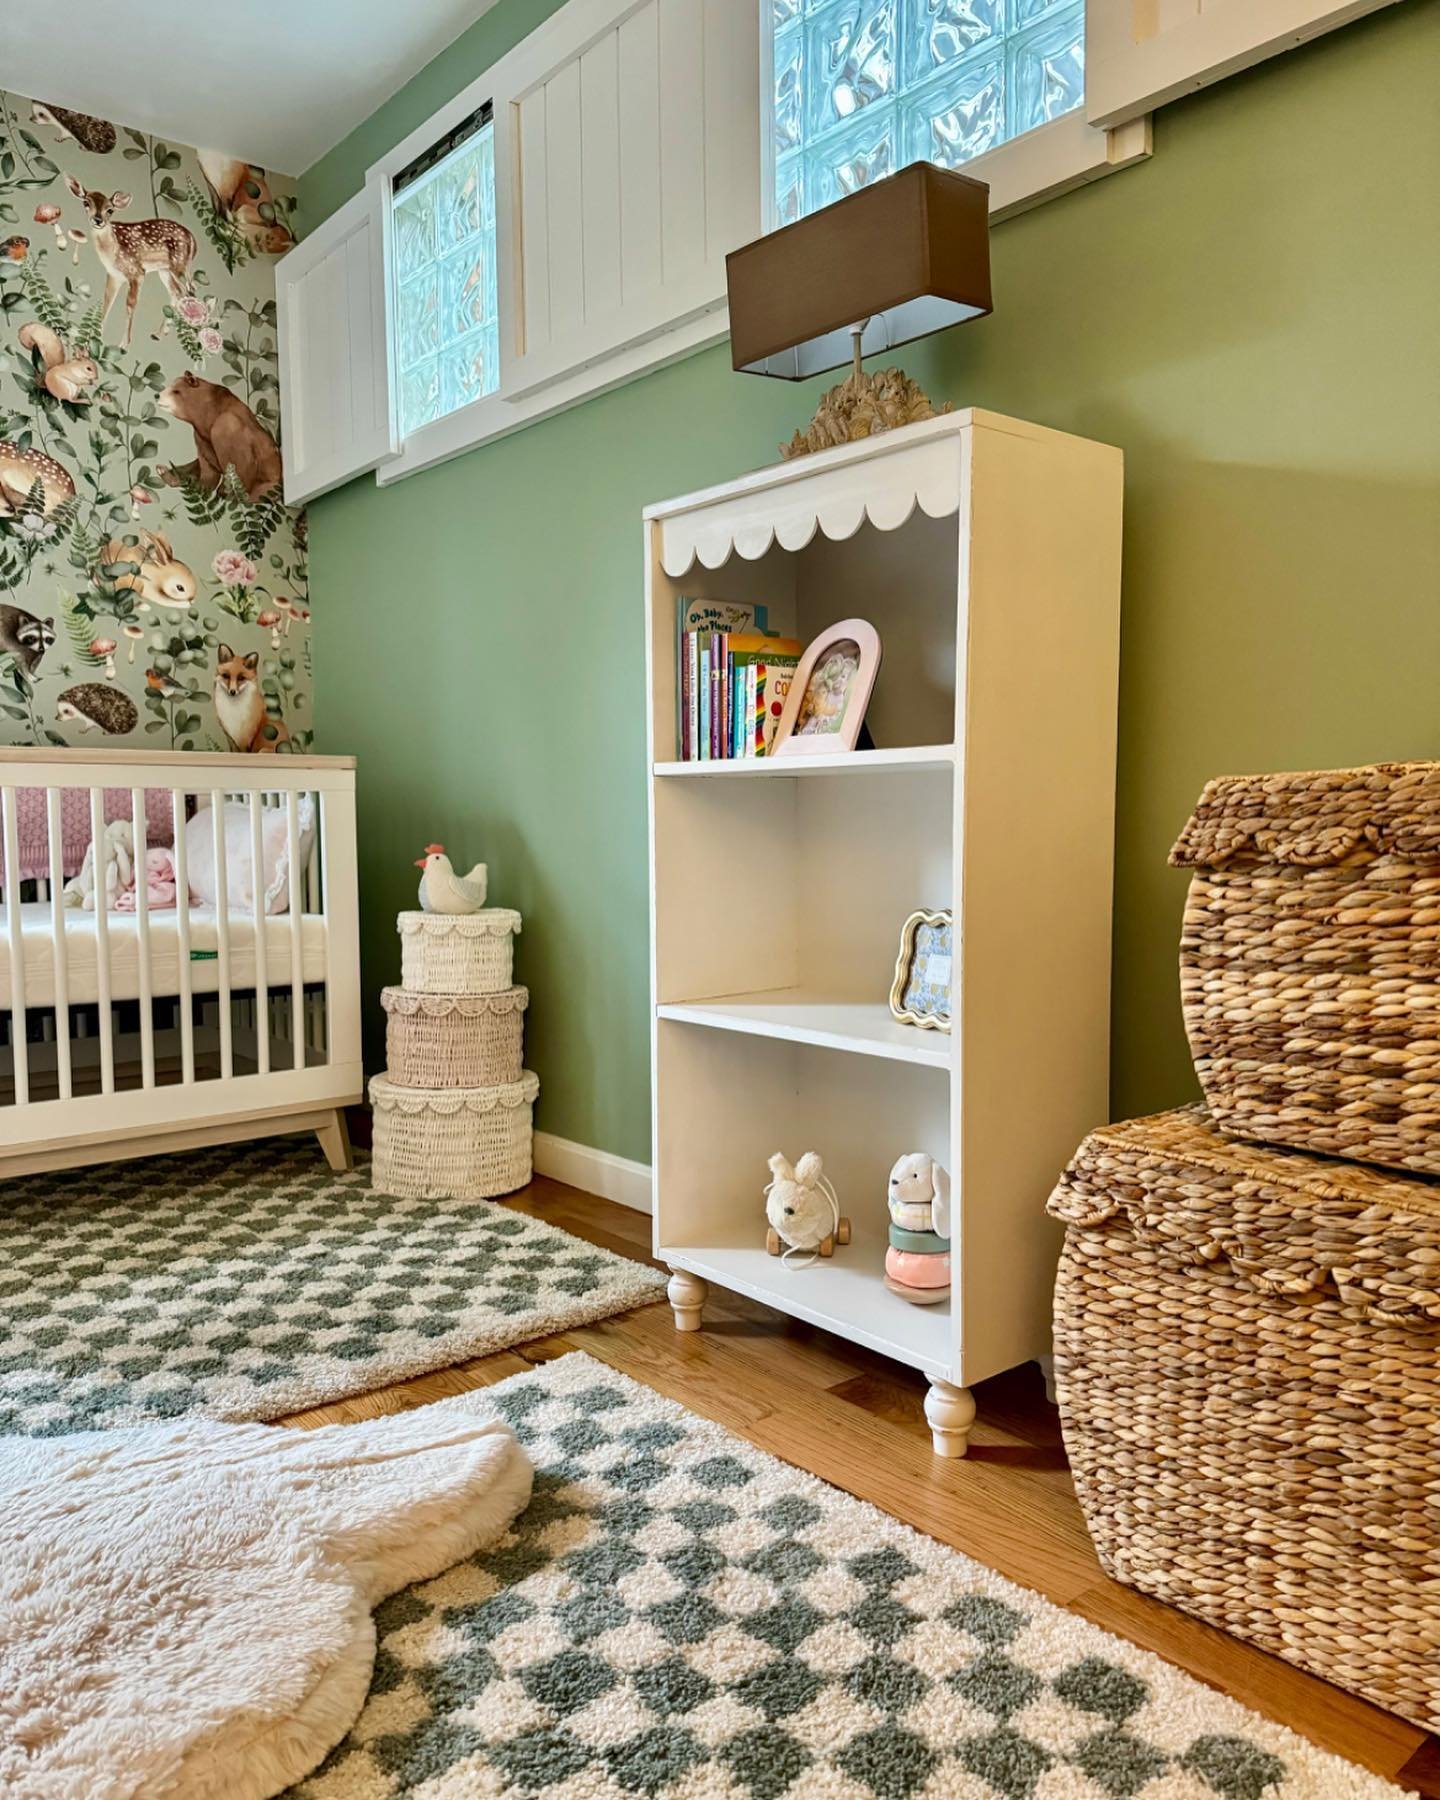 We loved re-creating this bookcase for baby girl&rsquo;s woodland nursery 🦊 Don&rsquo;t pay crazy prices for cheaply made furniture&hellip; buy vintage and get creative. And if you can&rsquo;t, we&rsquo;re always here to help!